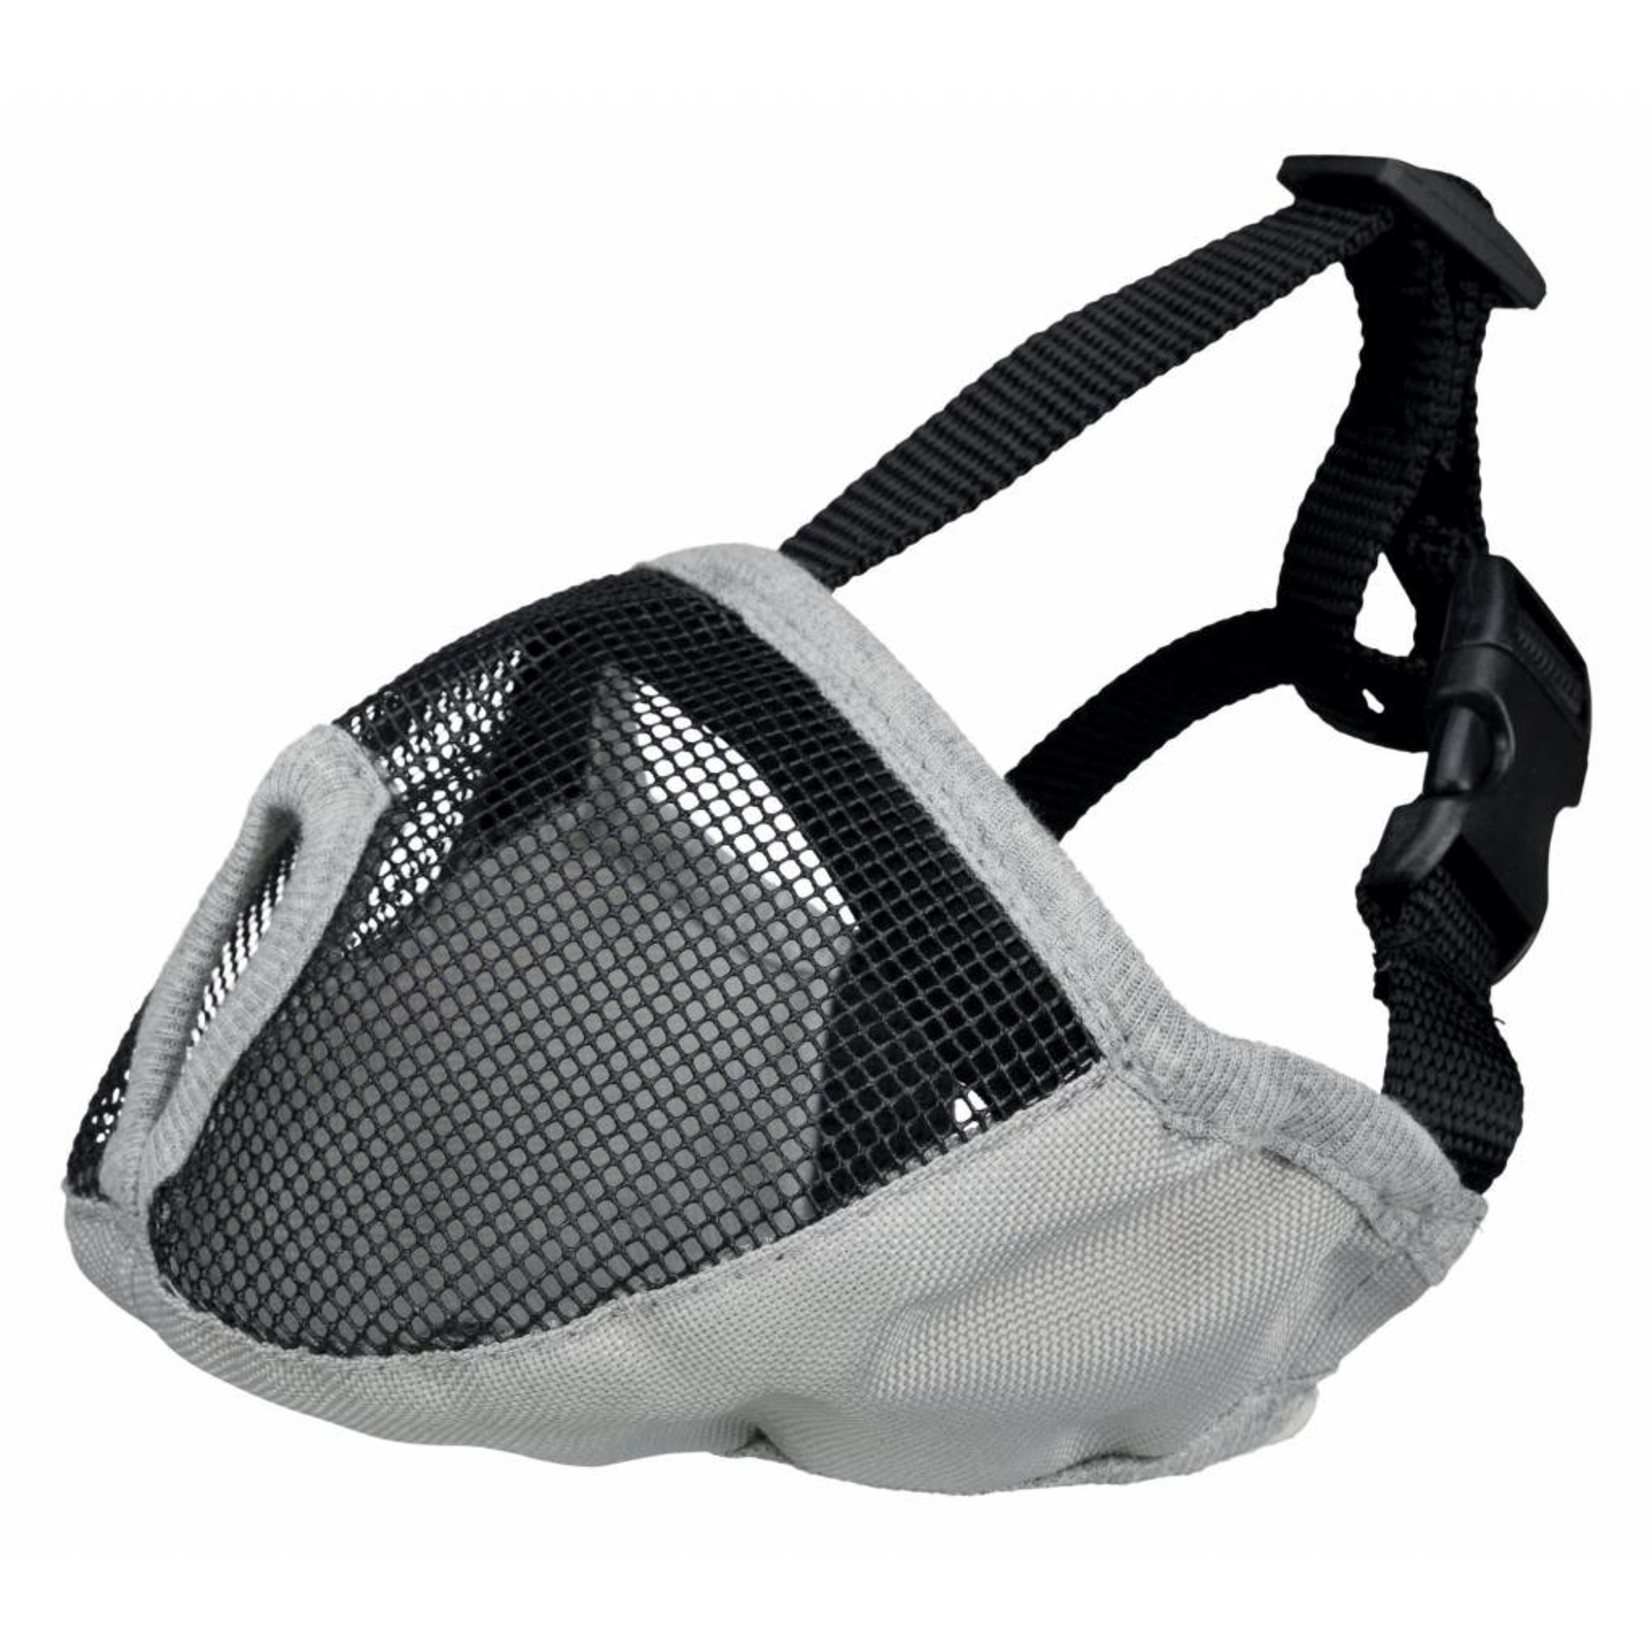 Trixie 'CLEARANCE' Muzzle for Short Nose Dog Breeds, in Grey